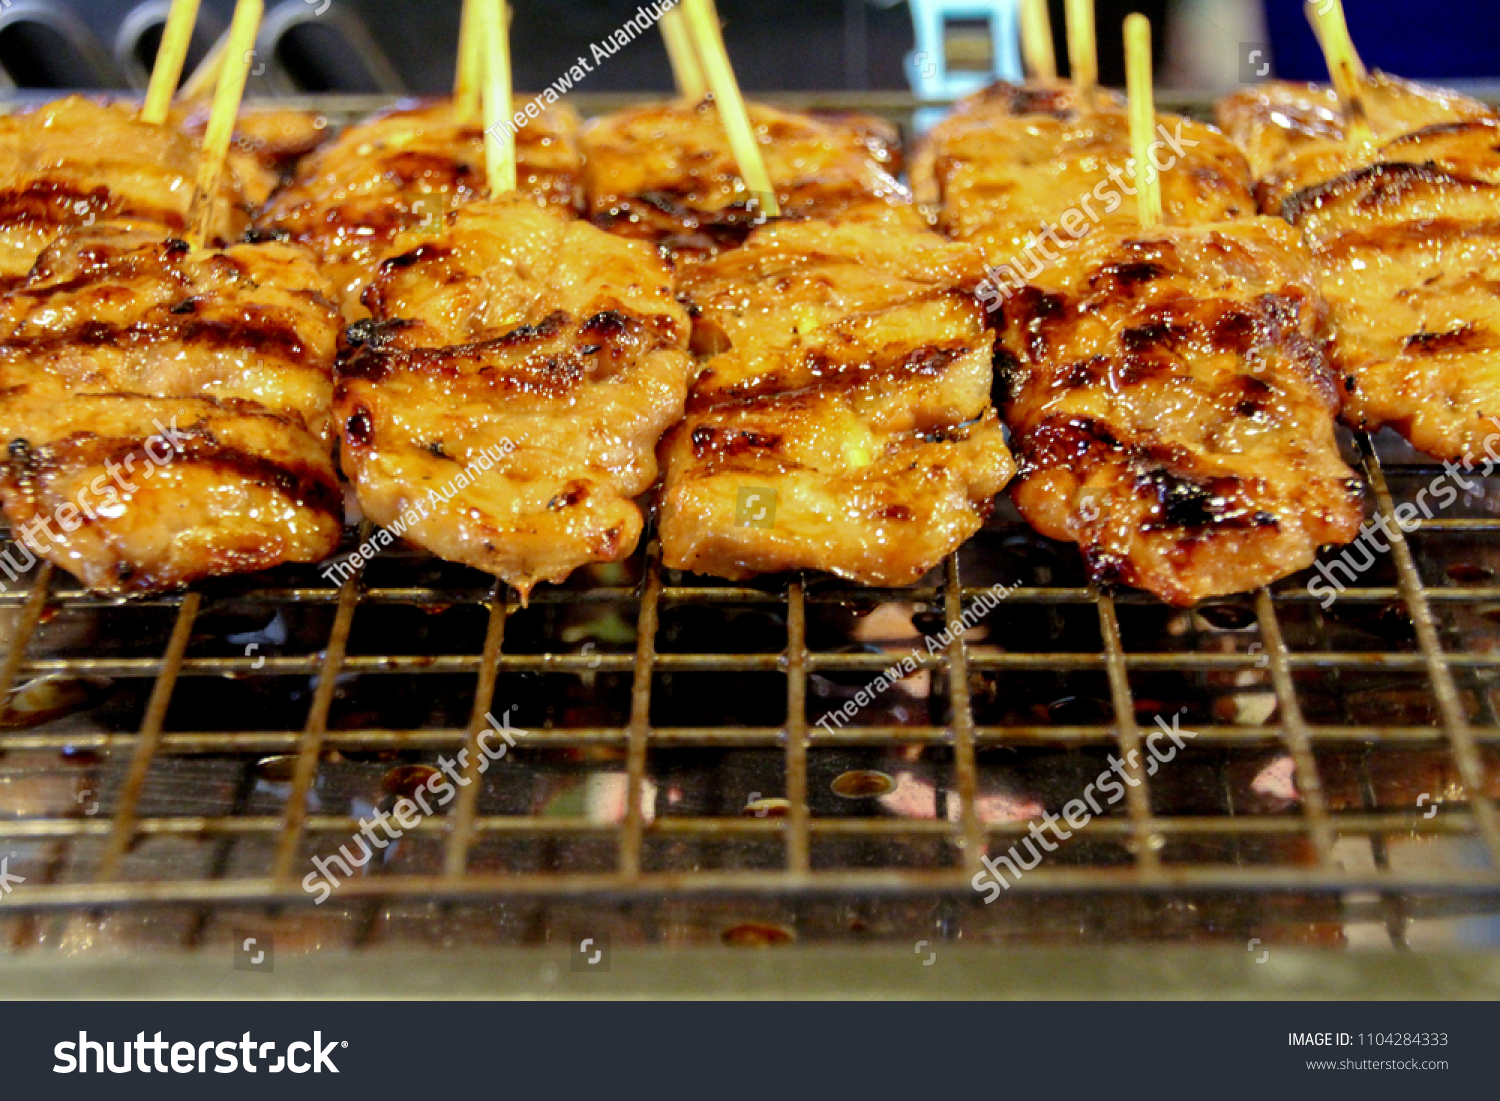 Grilled Pork with Bamboo wooden.There is space for iron grids and rectangular sections of steel grid. #1104284333